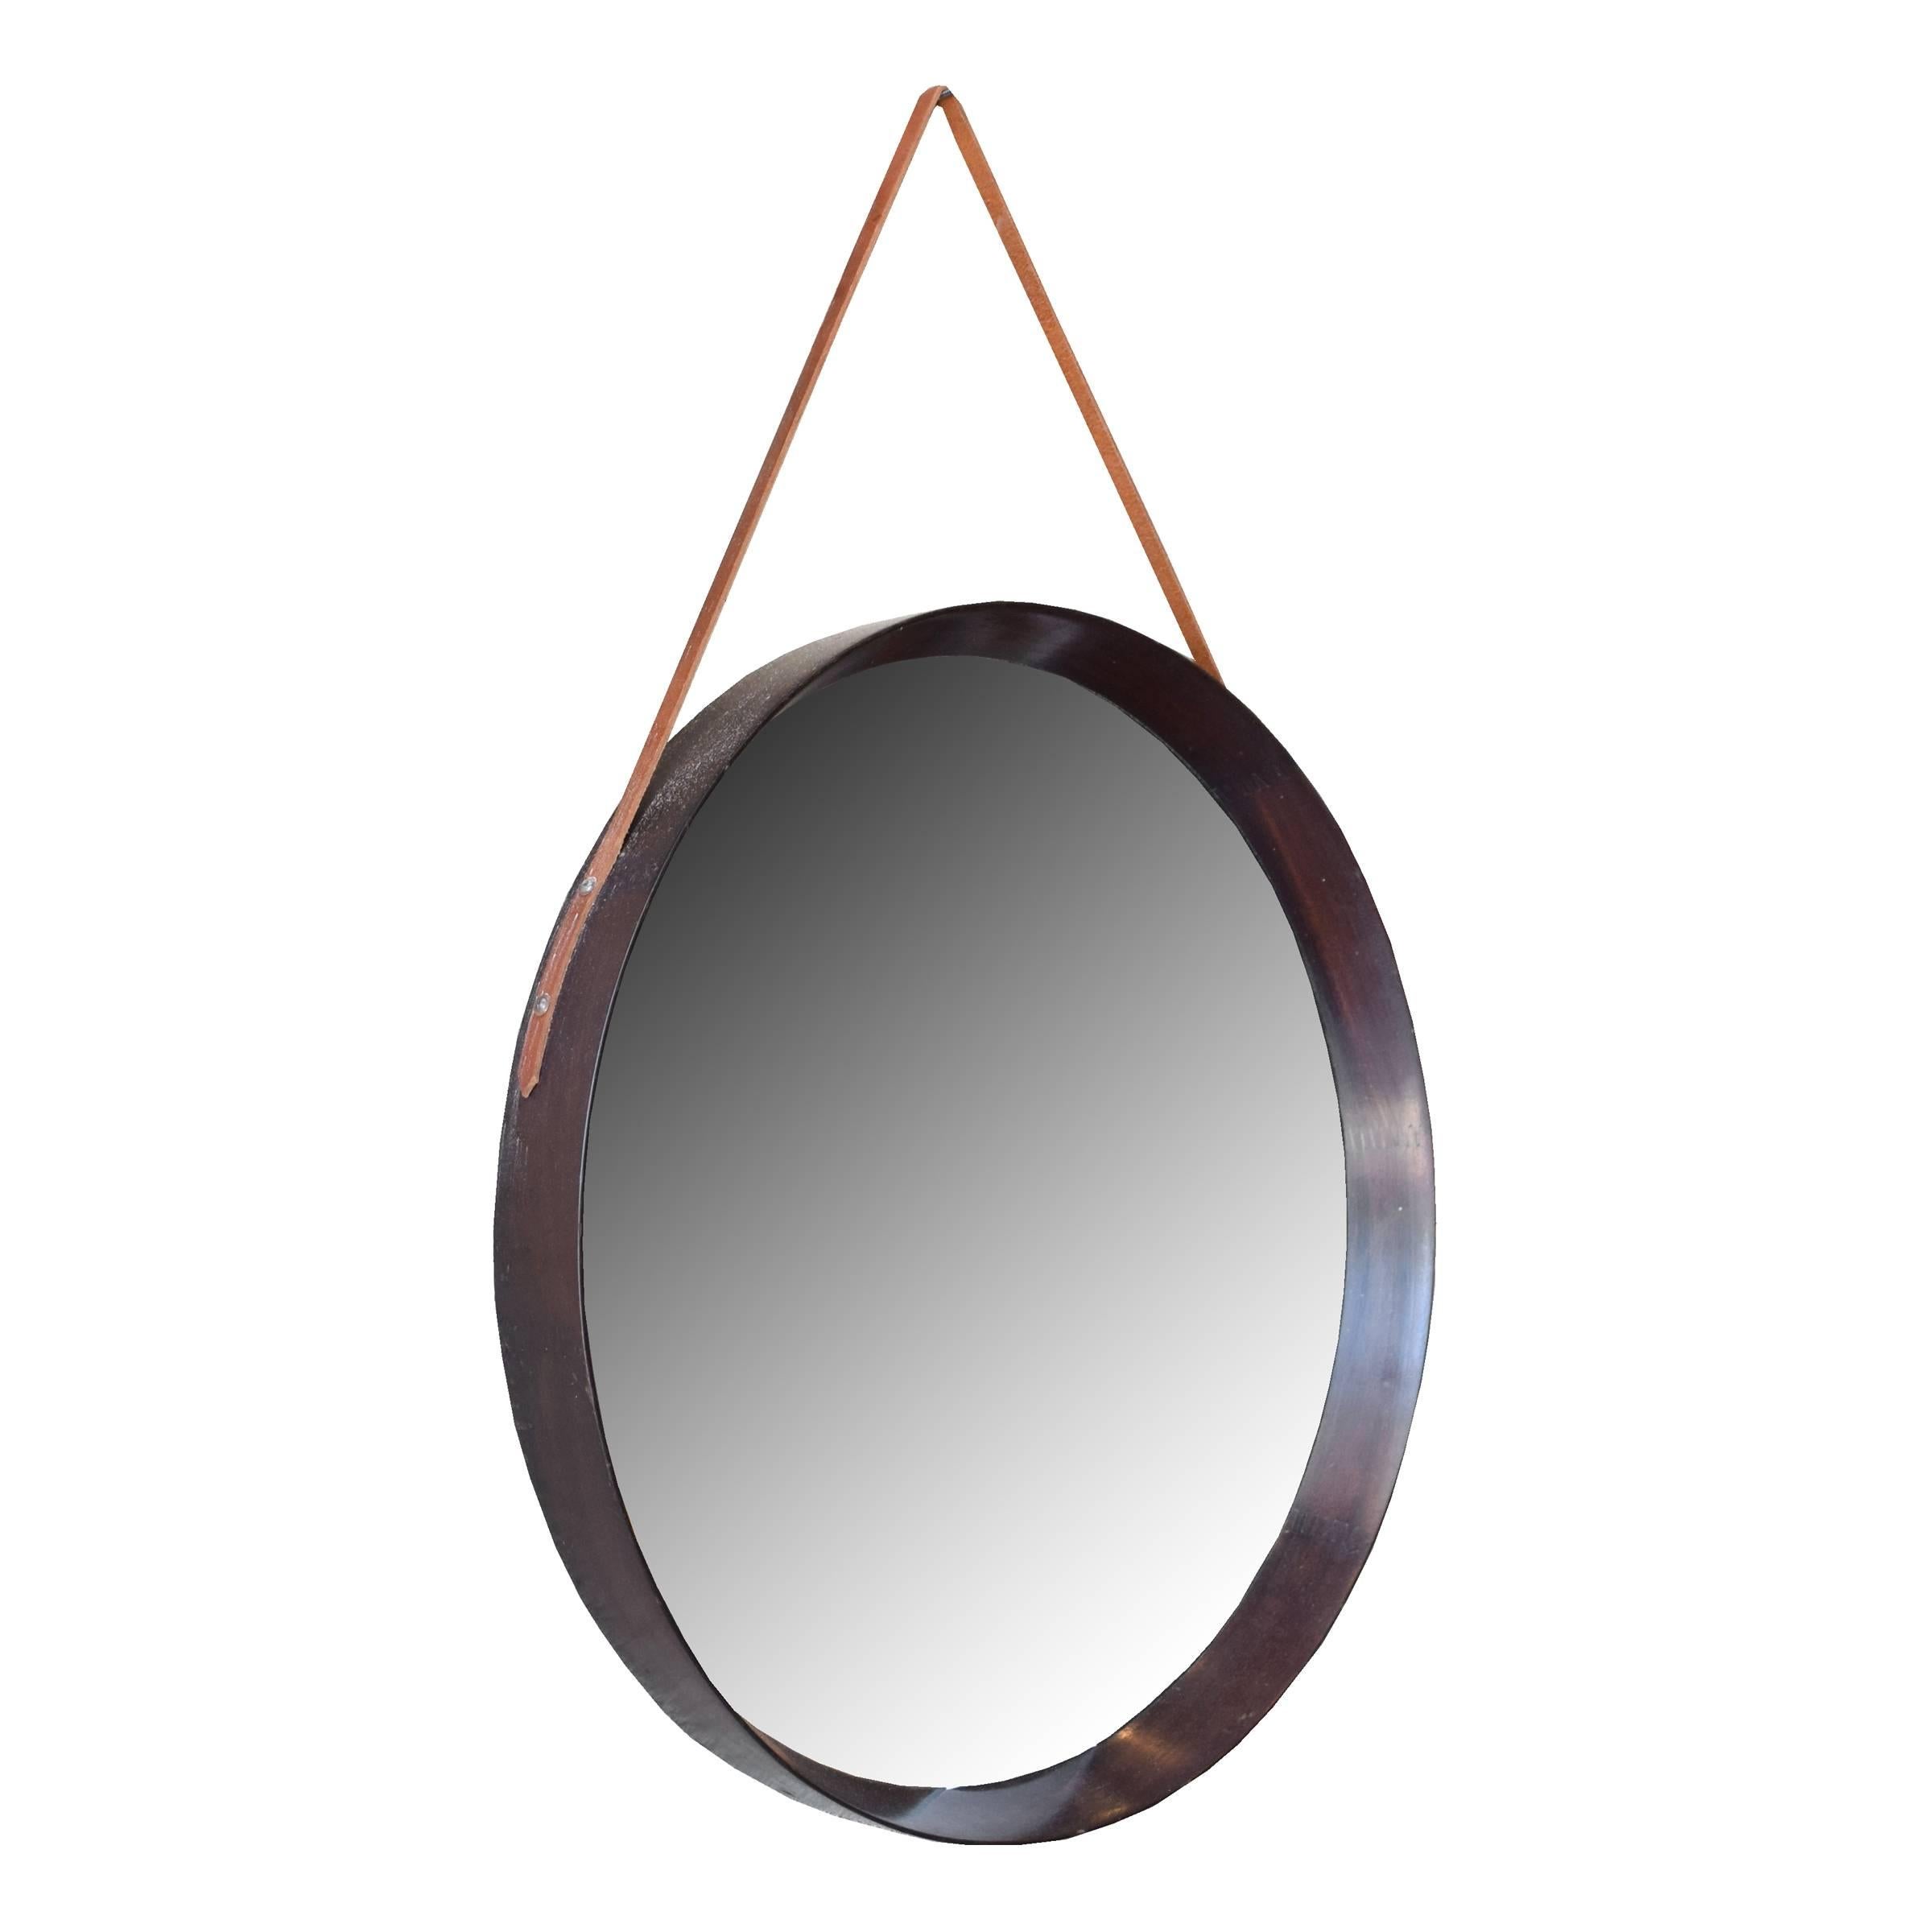 An Italian Mid-Century round mirror with a mahogany frame and newer leather strap.